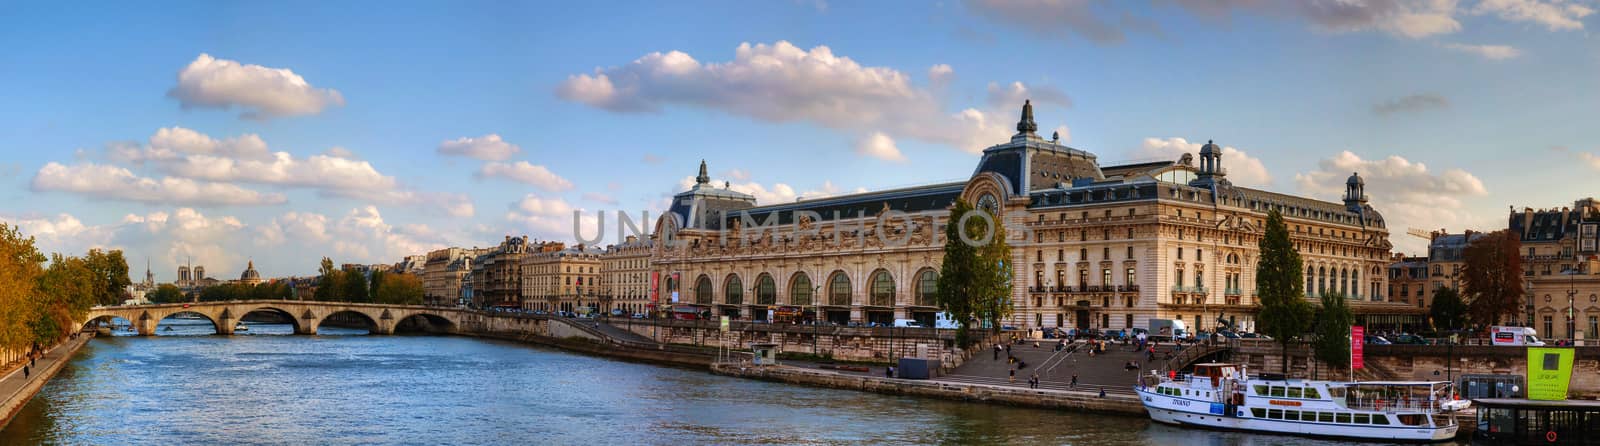 PARIS - OCTOBER 9: D'Orsay museum building on October 9, 2014 in Paris, France. The Musee d'Orsay is a museum in Paris, on the left bank of the Seine.